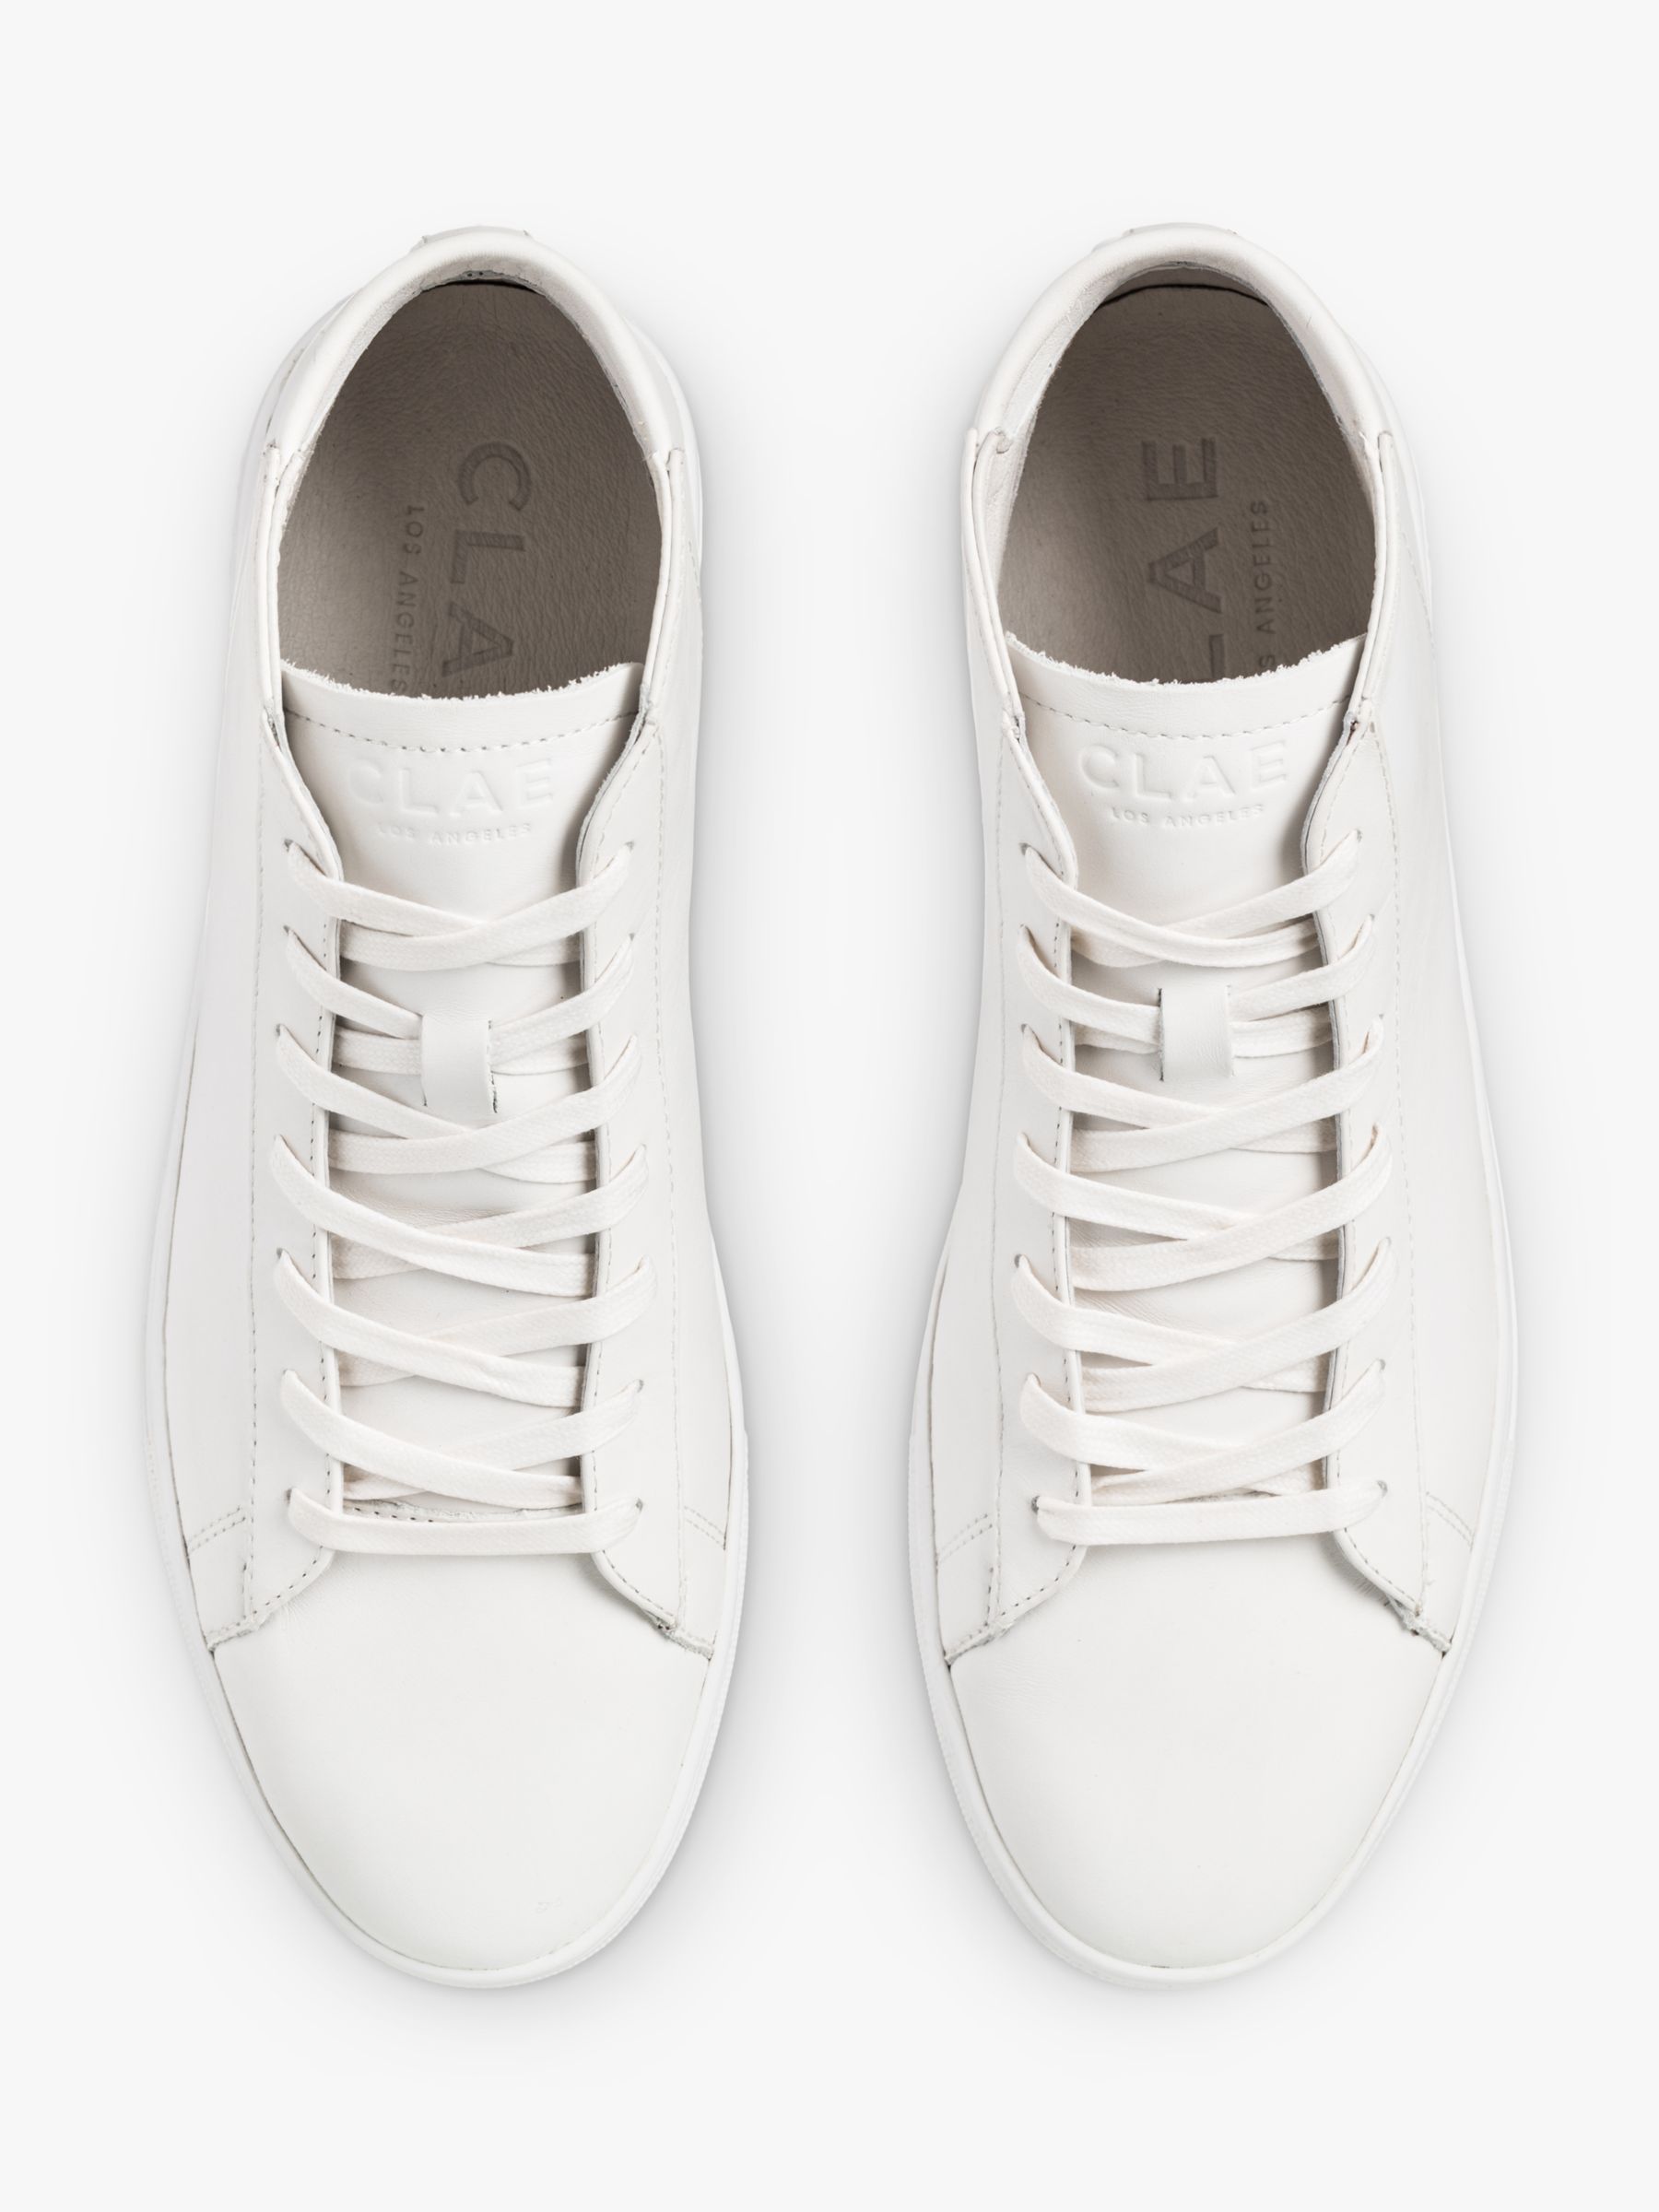 CLAE Bradley Mid-Top Leather Trainers, White at John Lewis & Partners